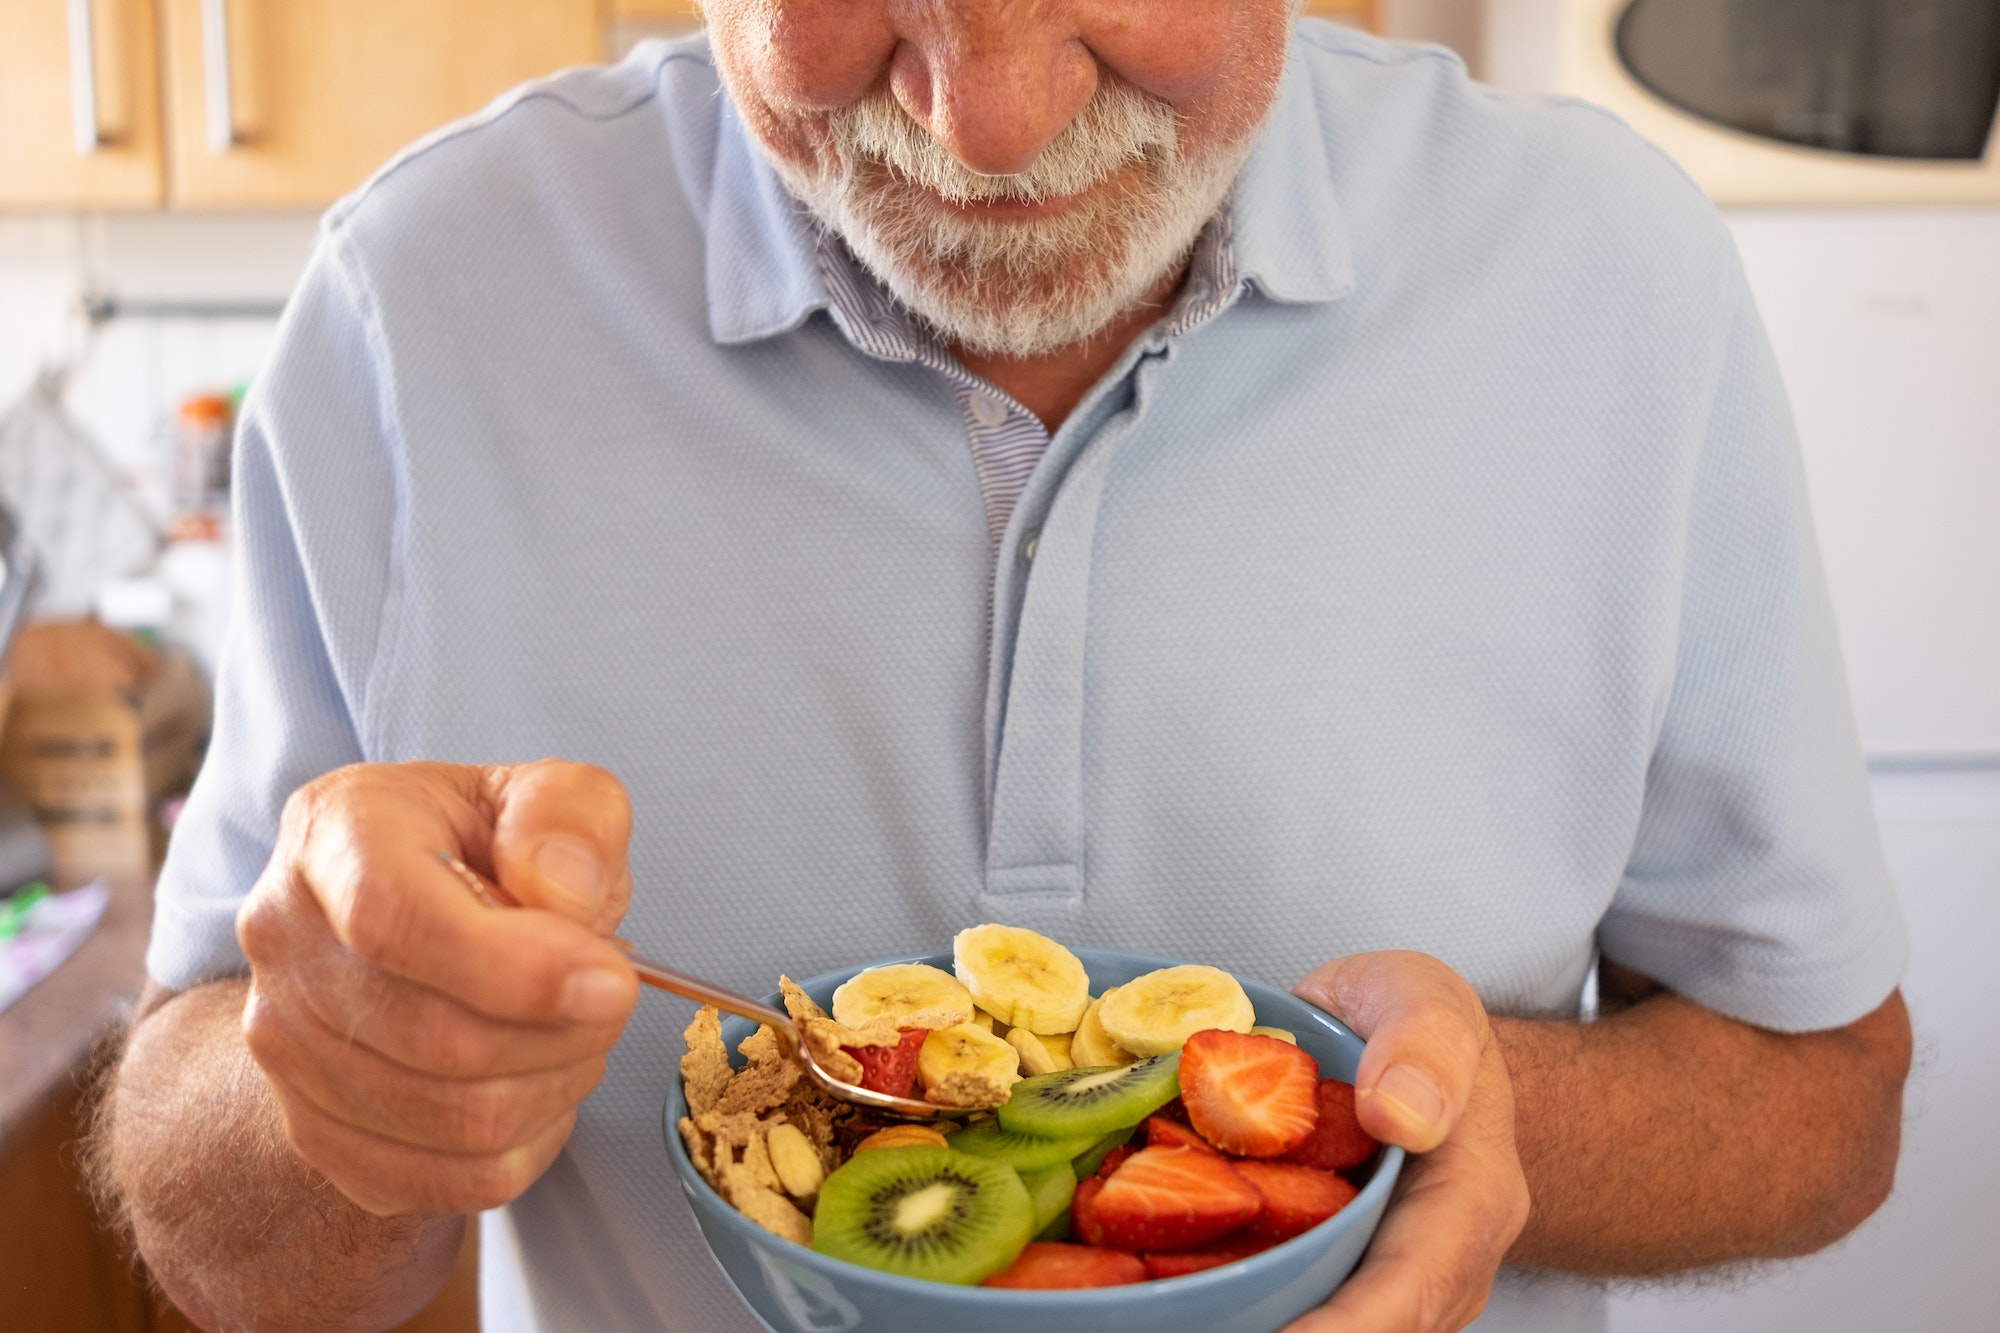 Senior man ready to eat a salad of fresh and dried fruits. Breakfast or lunch time, healthy eating